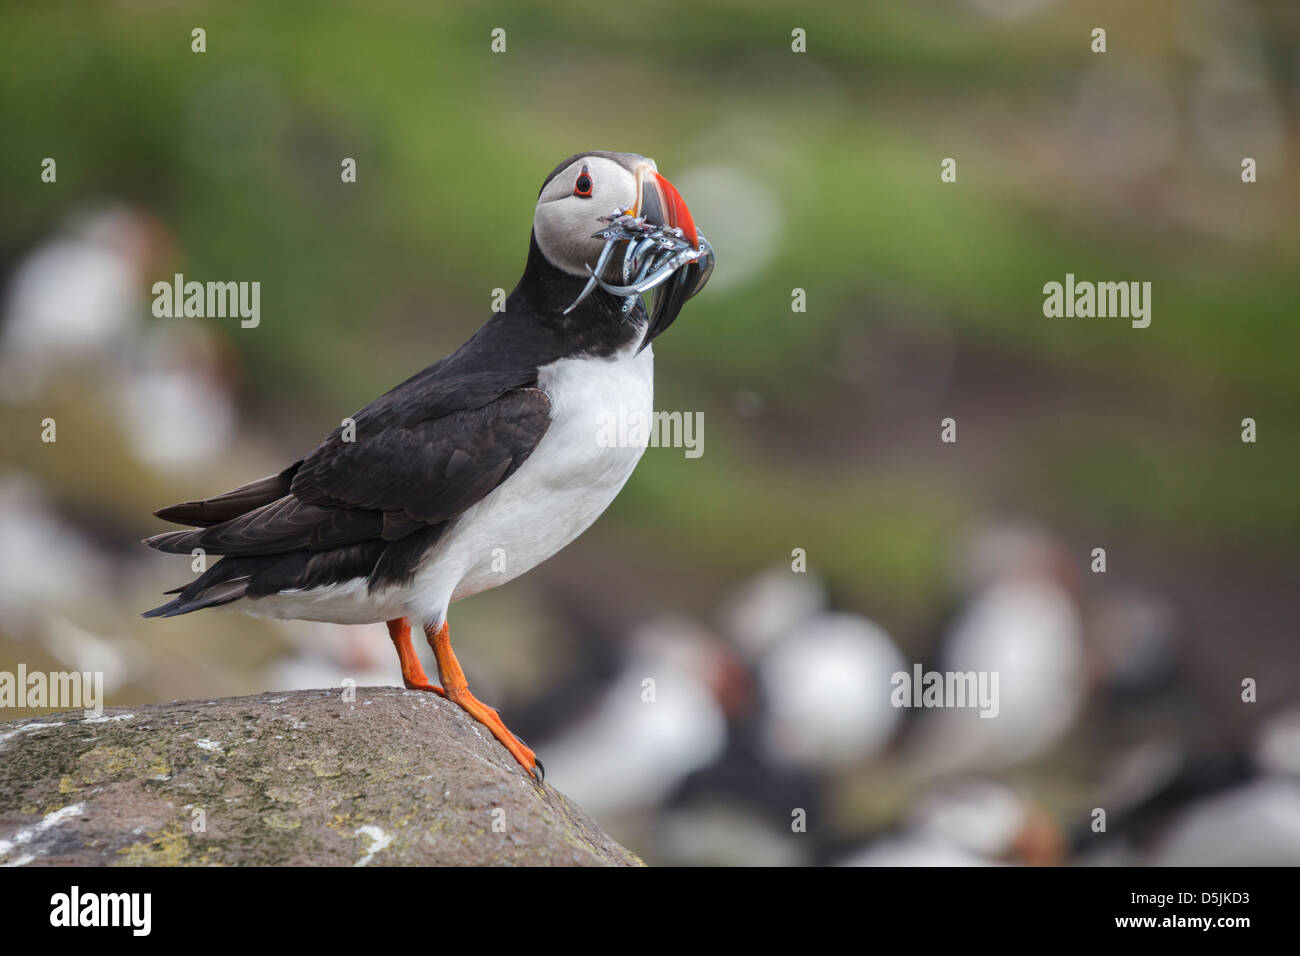 A puffin standing with Sand Eels in its beak.  Captured on Inner Farne, part of the Farne Islands in Northumberland. Stock Photo